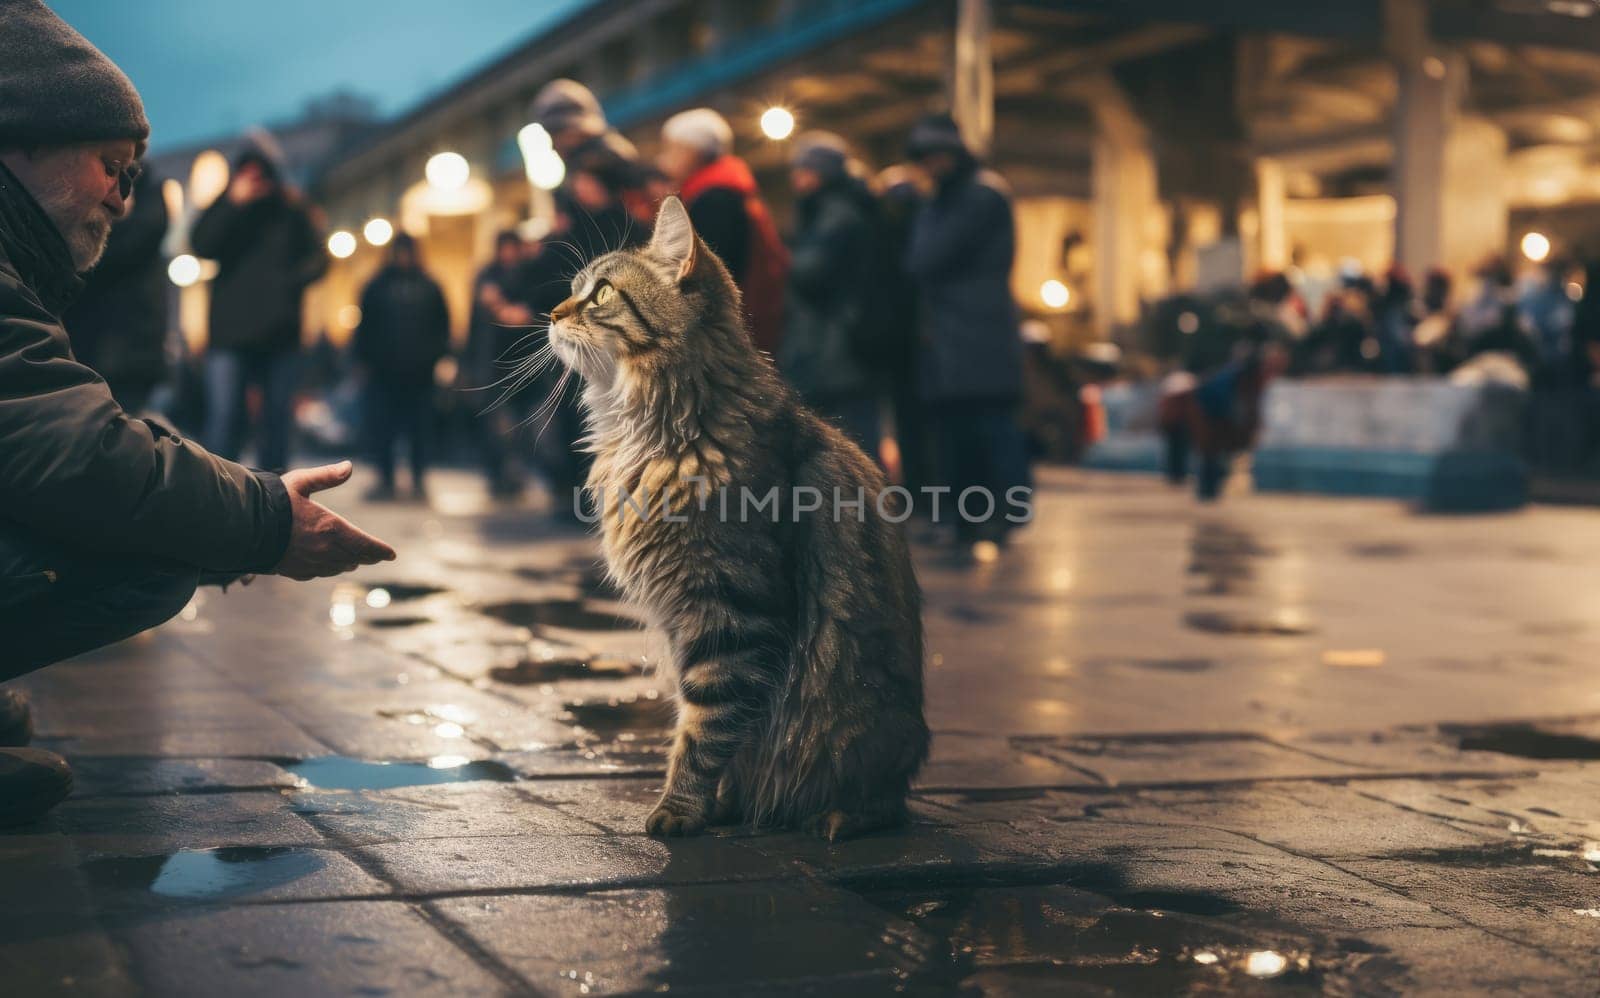 A kind stranger feeds a stray cat on a cold, rainy night.Generated image by dotshock